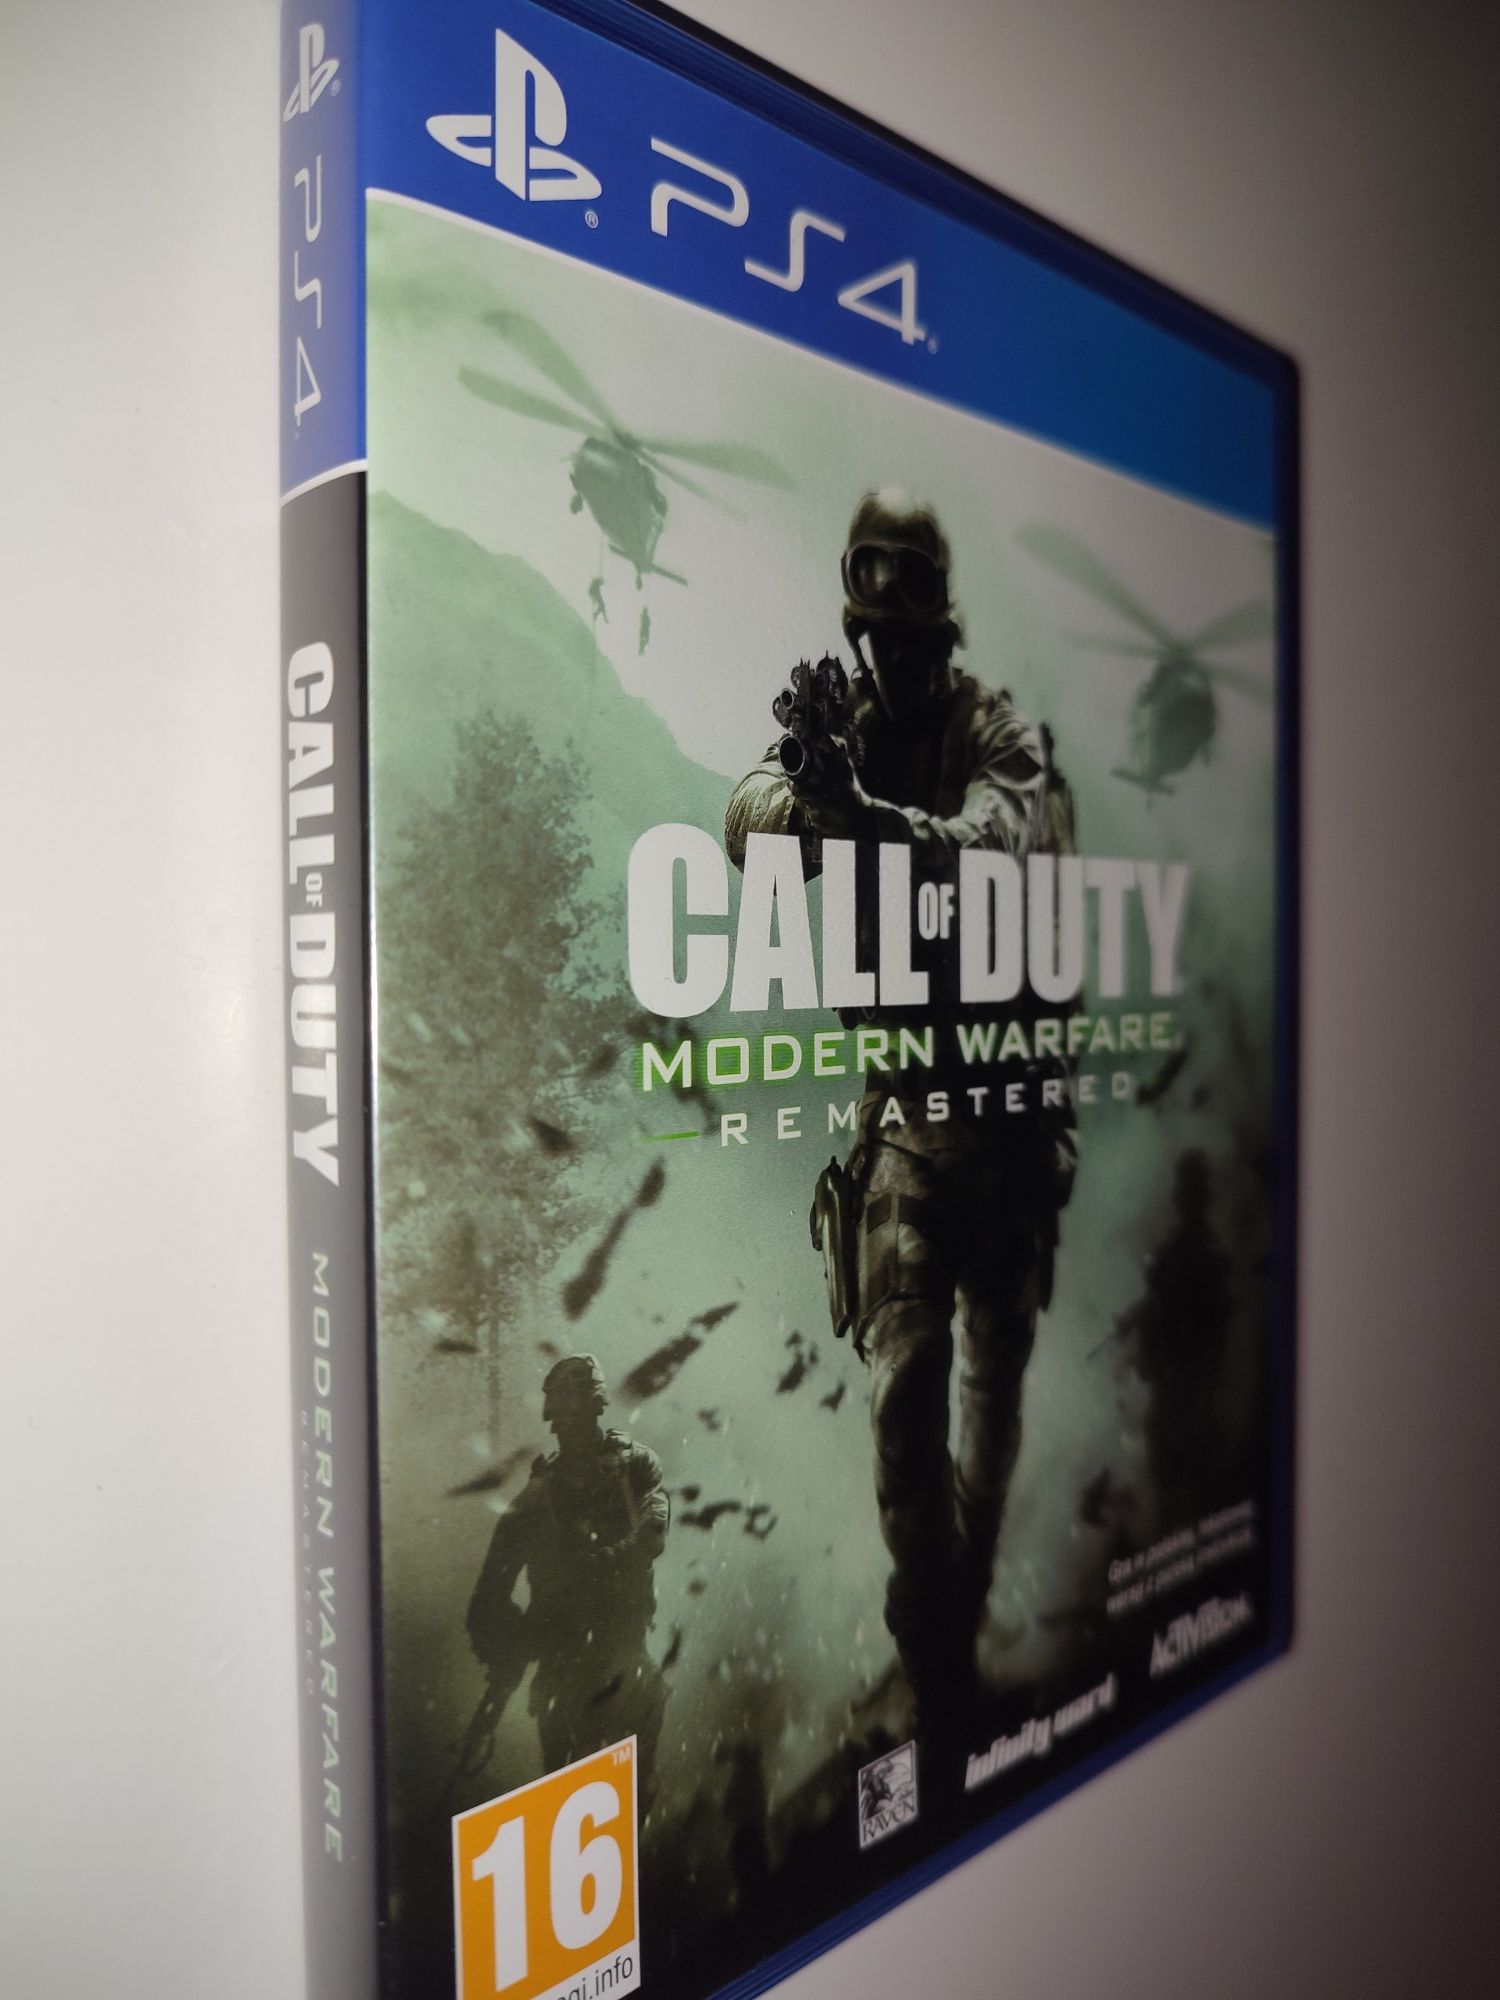 Gra Ps4 Call of Duty Modern Warfare PL Remastered gry PlayStation 4